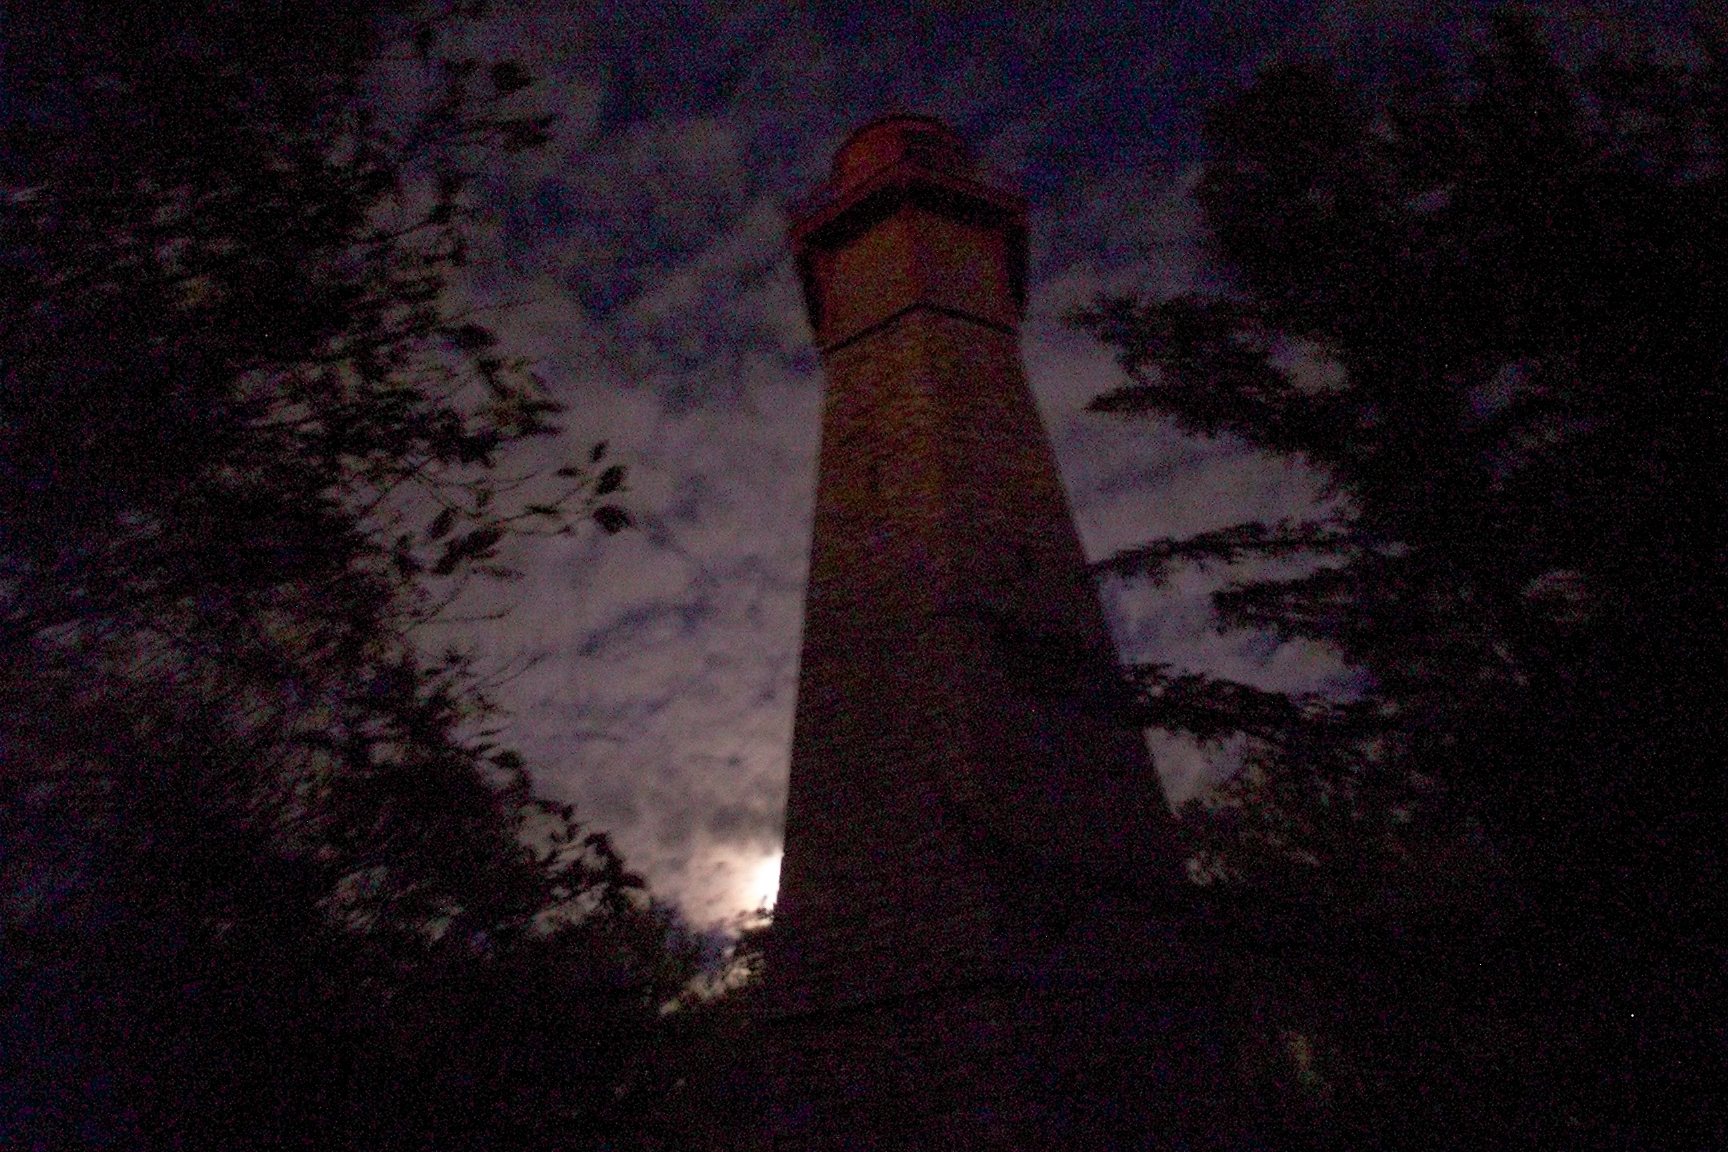 Lighthouse in between forests and against the dark night sky.